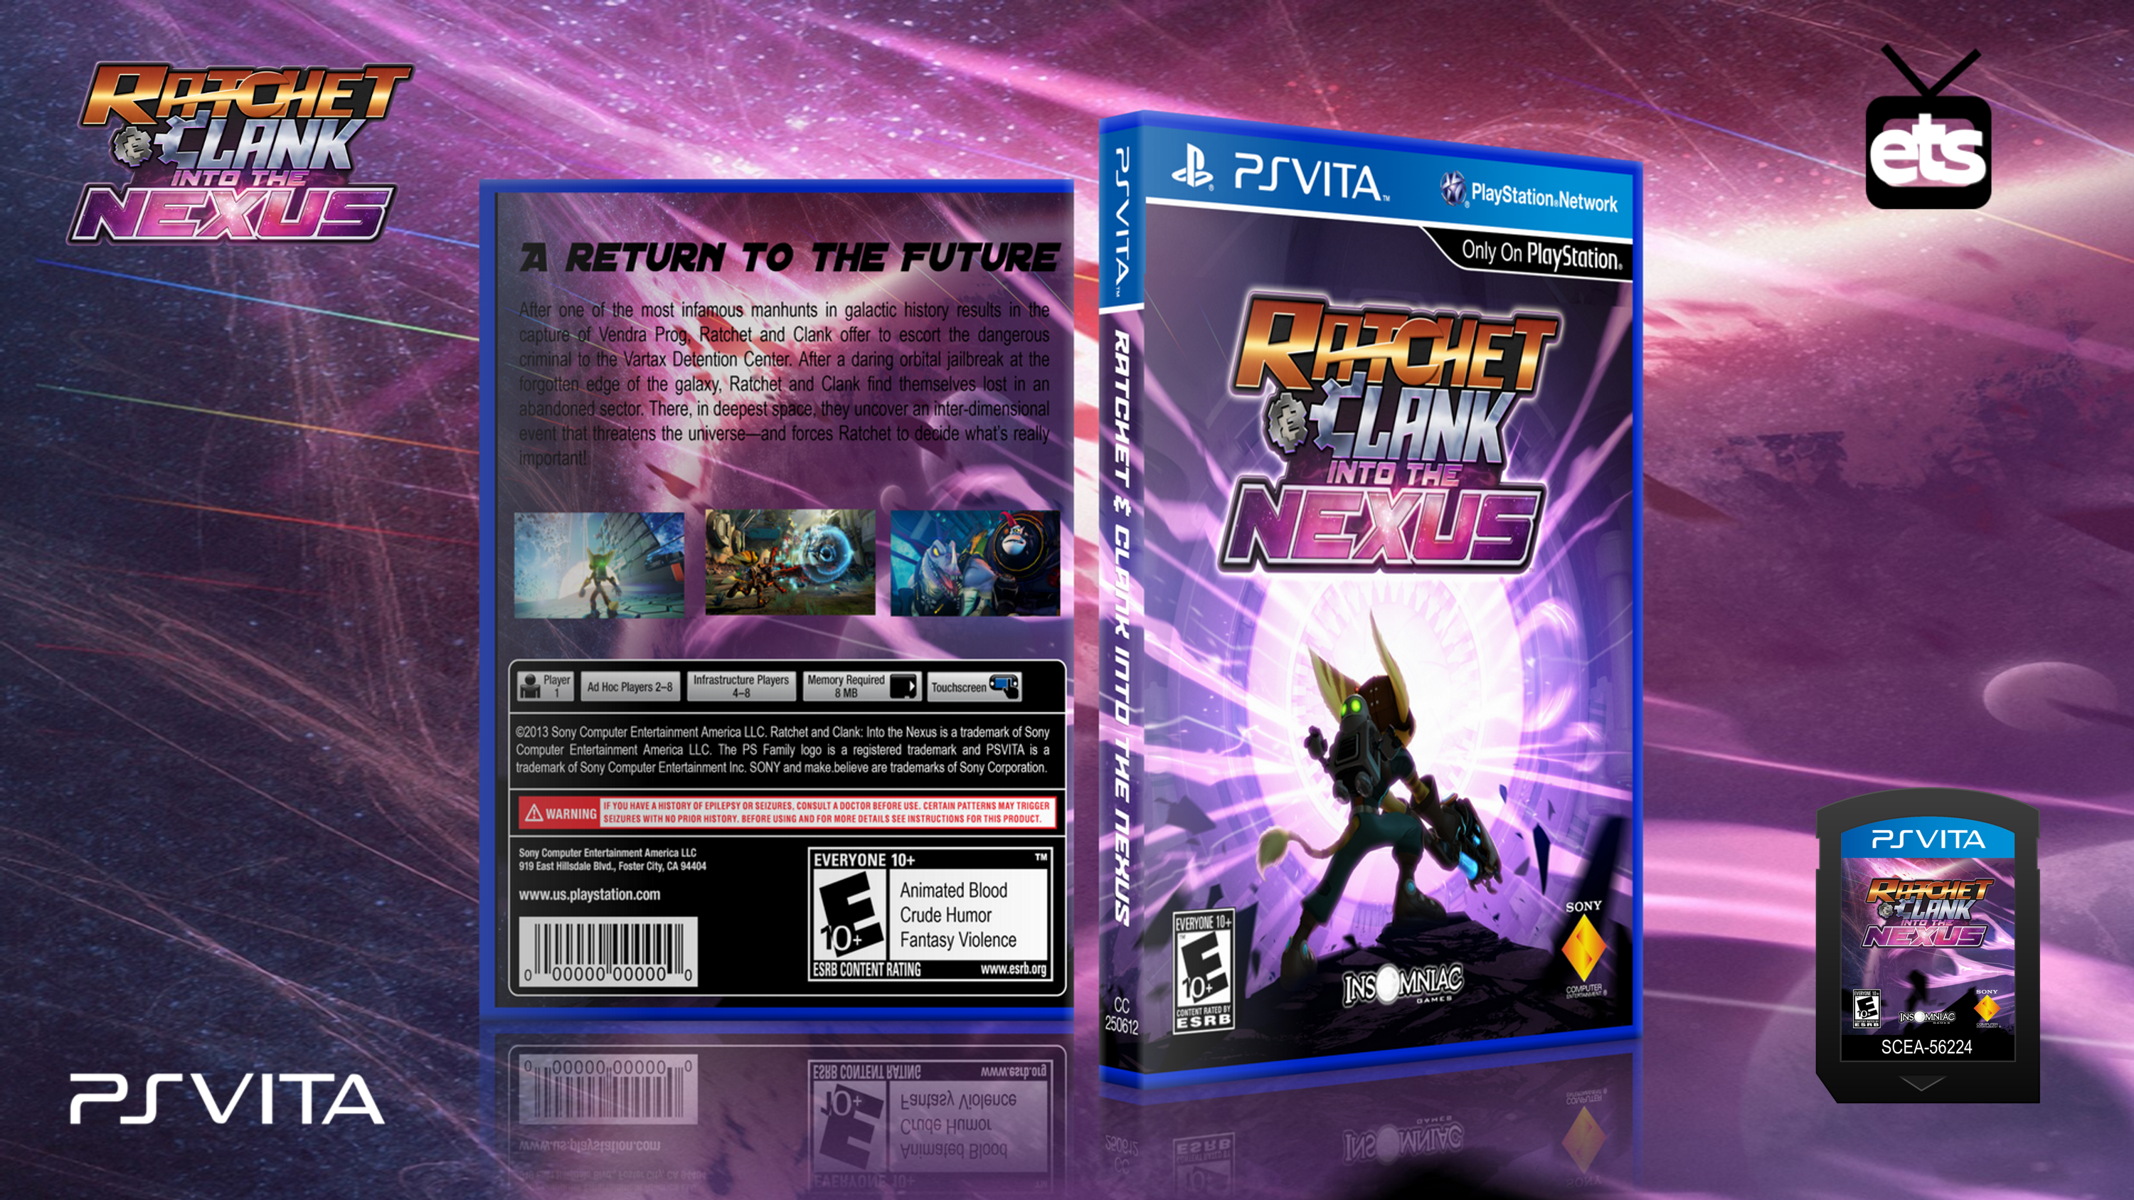 download free ratchet and clank into the nexus full game